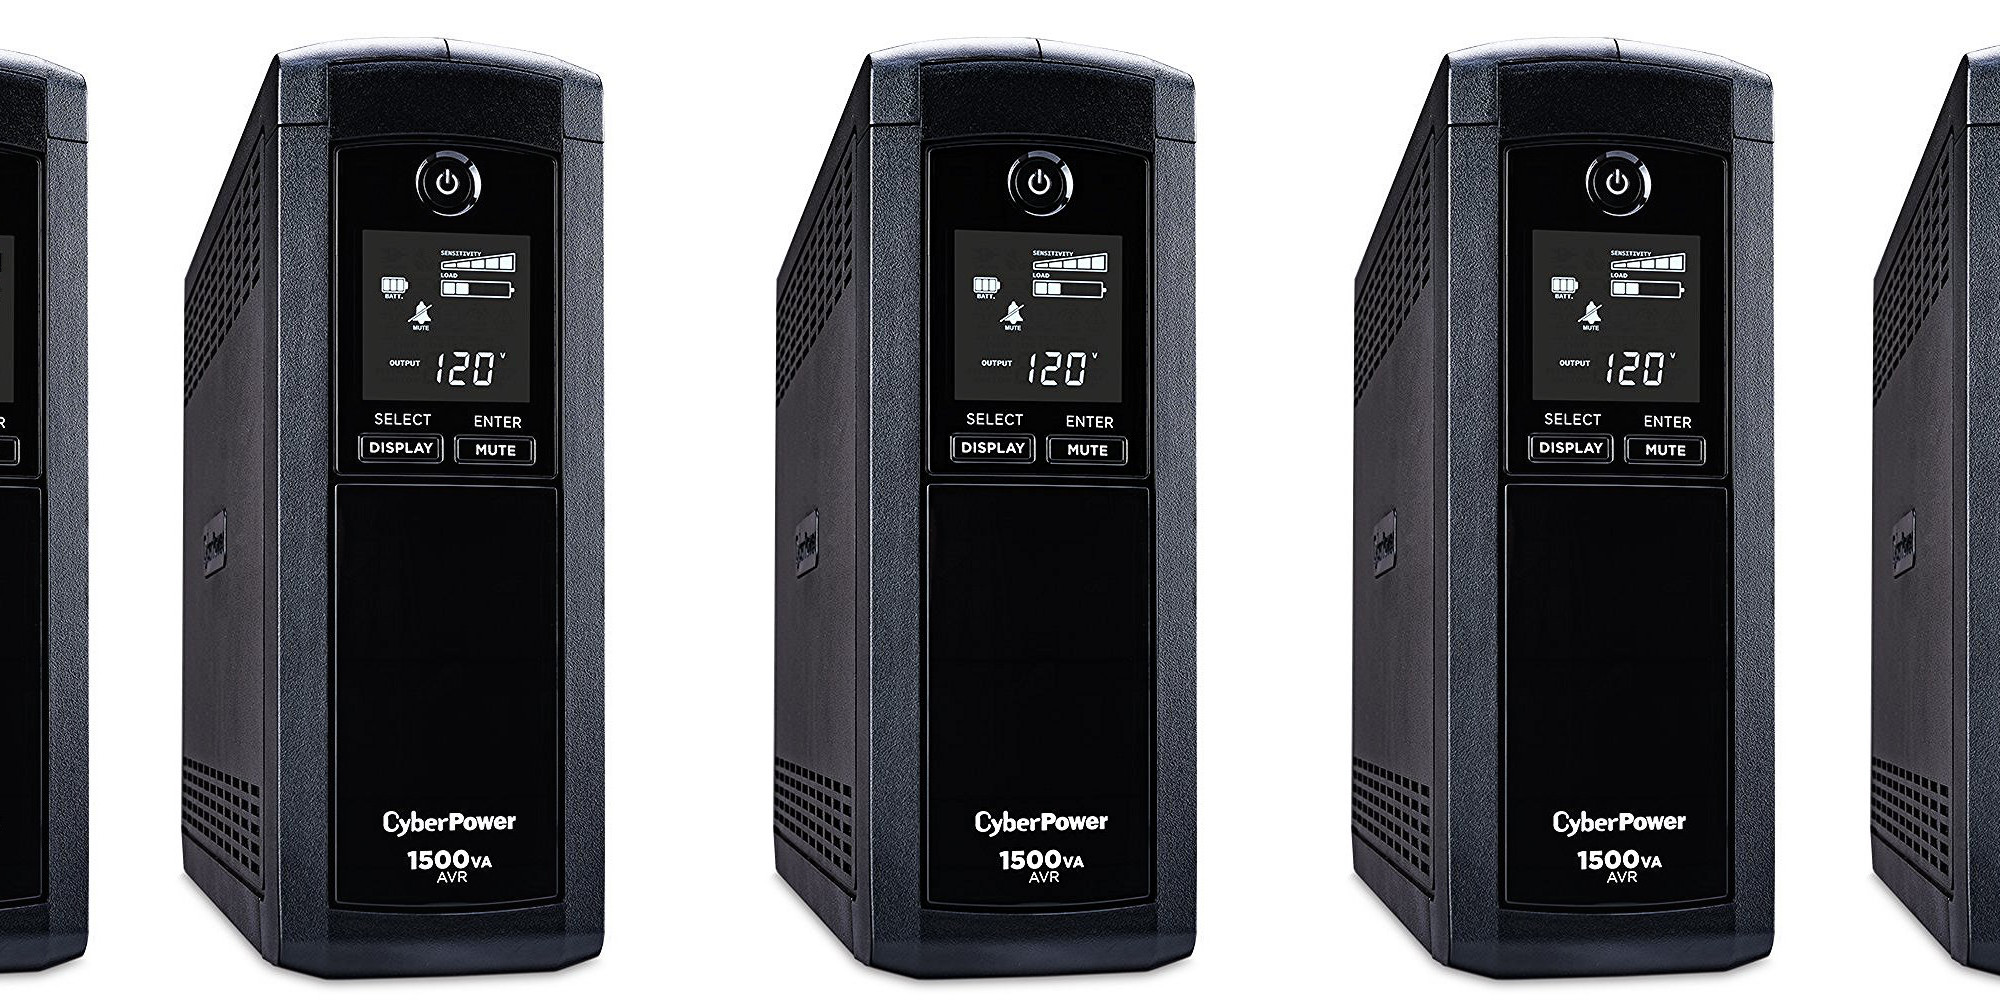 cyberpower-cp1500avr-900w-intelligent-battery-backup-ups-system